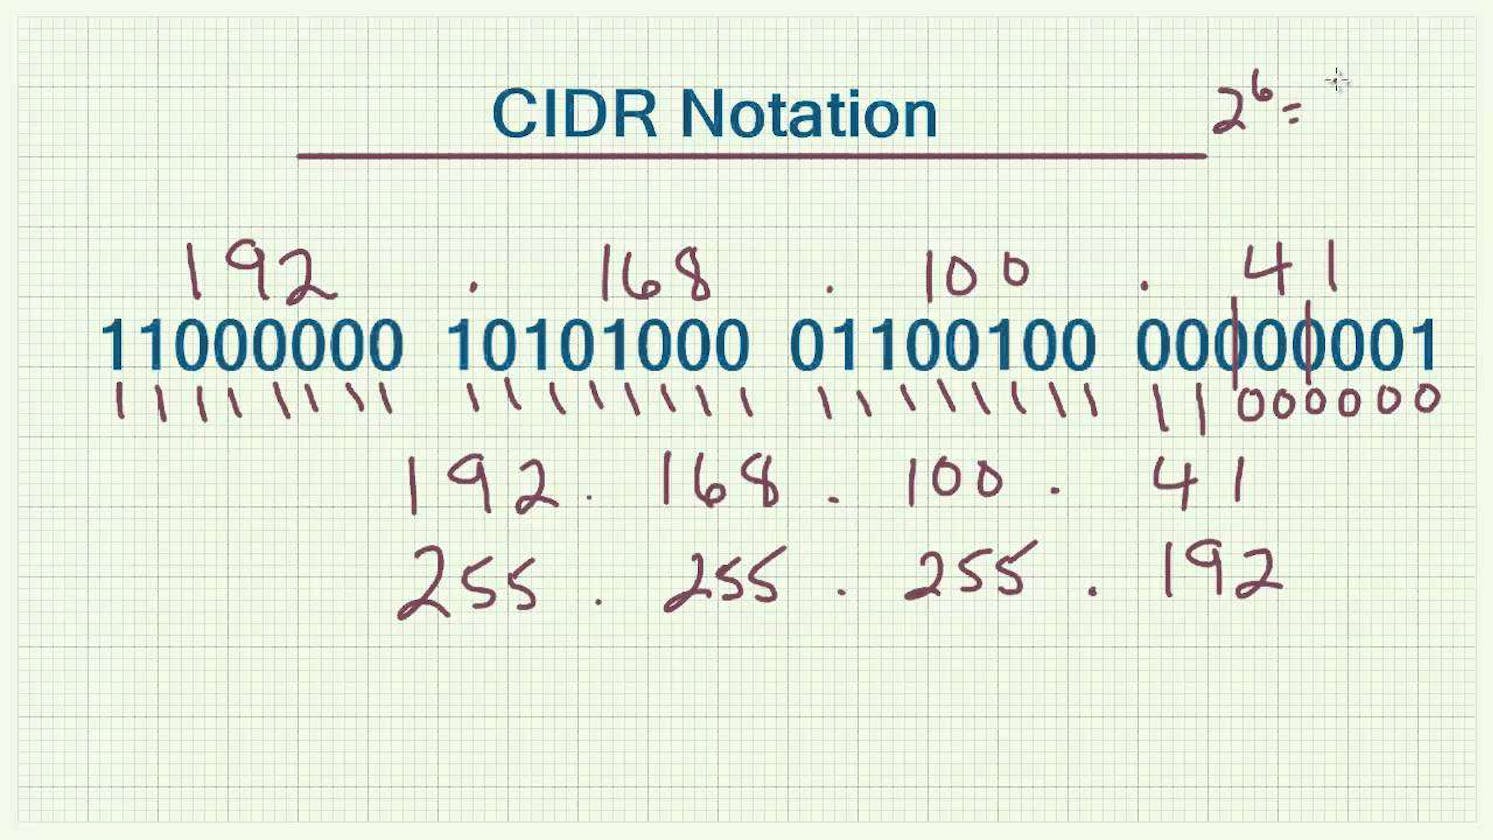 Daily Hack #day20 - CIDR (Classless Inter-Domain Routing) calculation